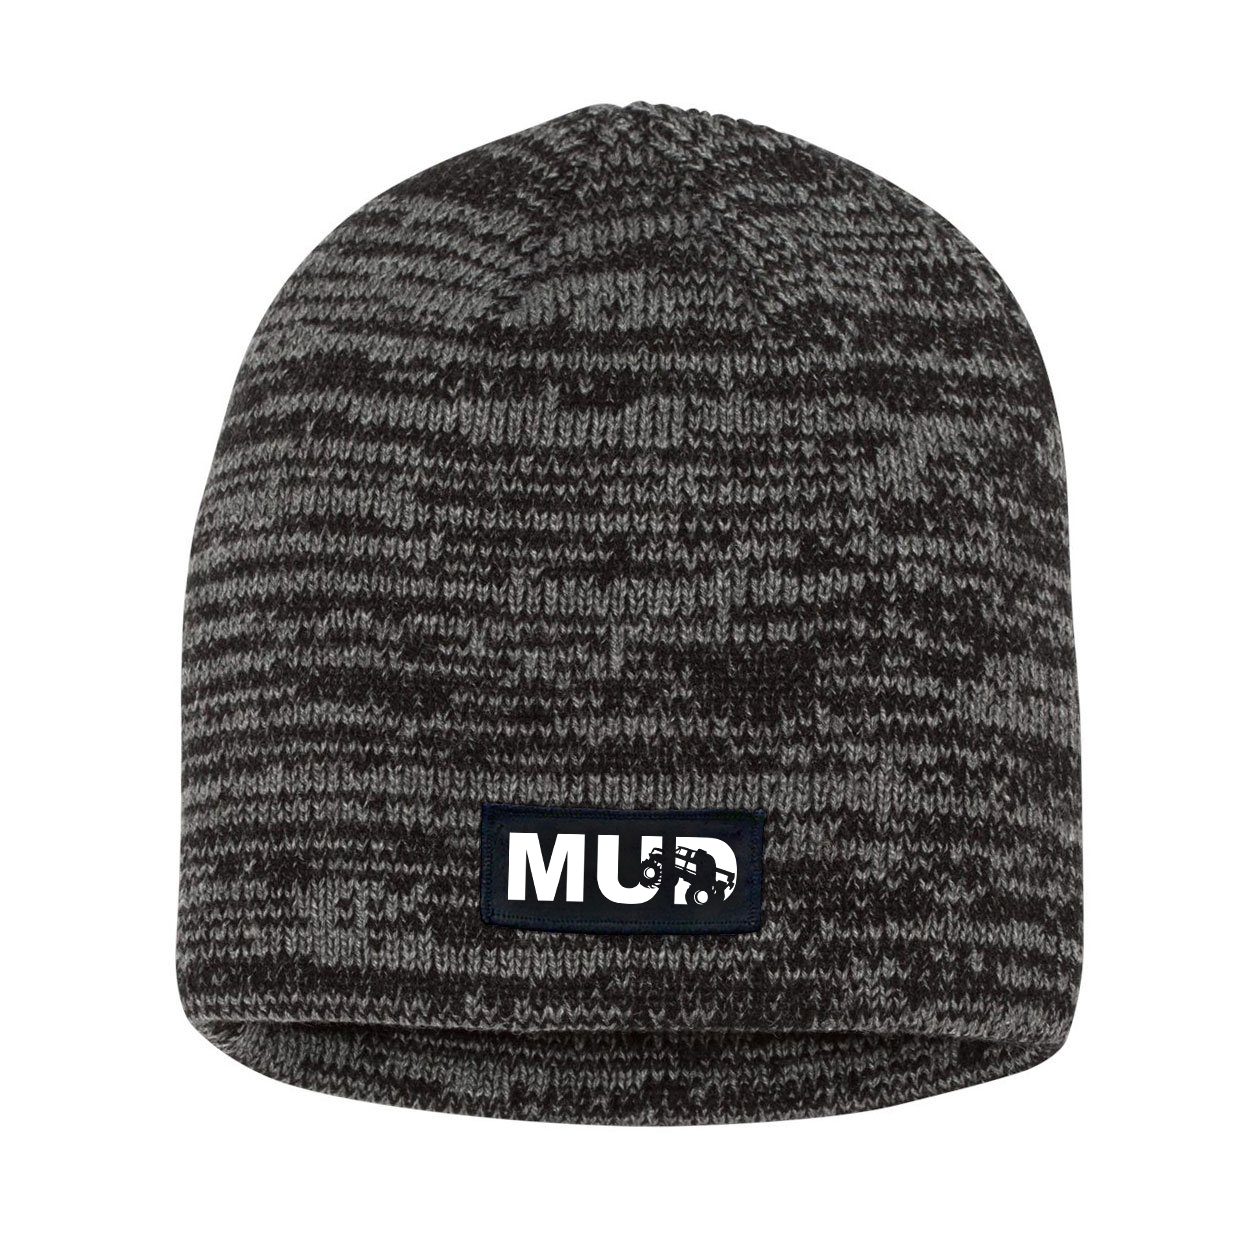 Mud Truck Logo Night Out Woven Patch Skully Marled Knit Beanie Black/Gray (White Logo)